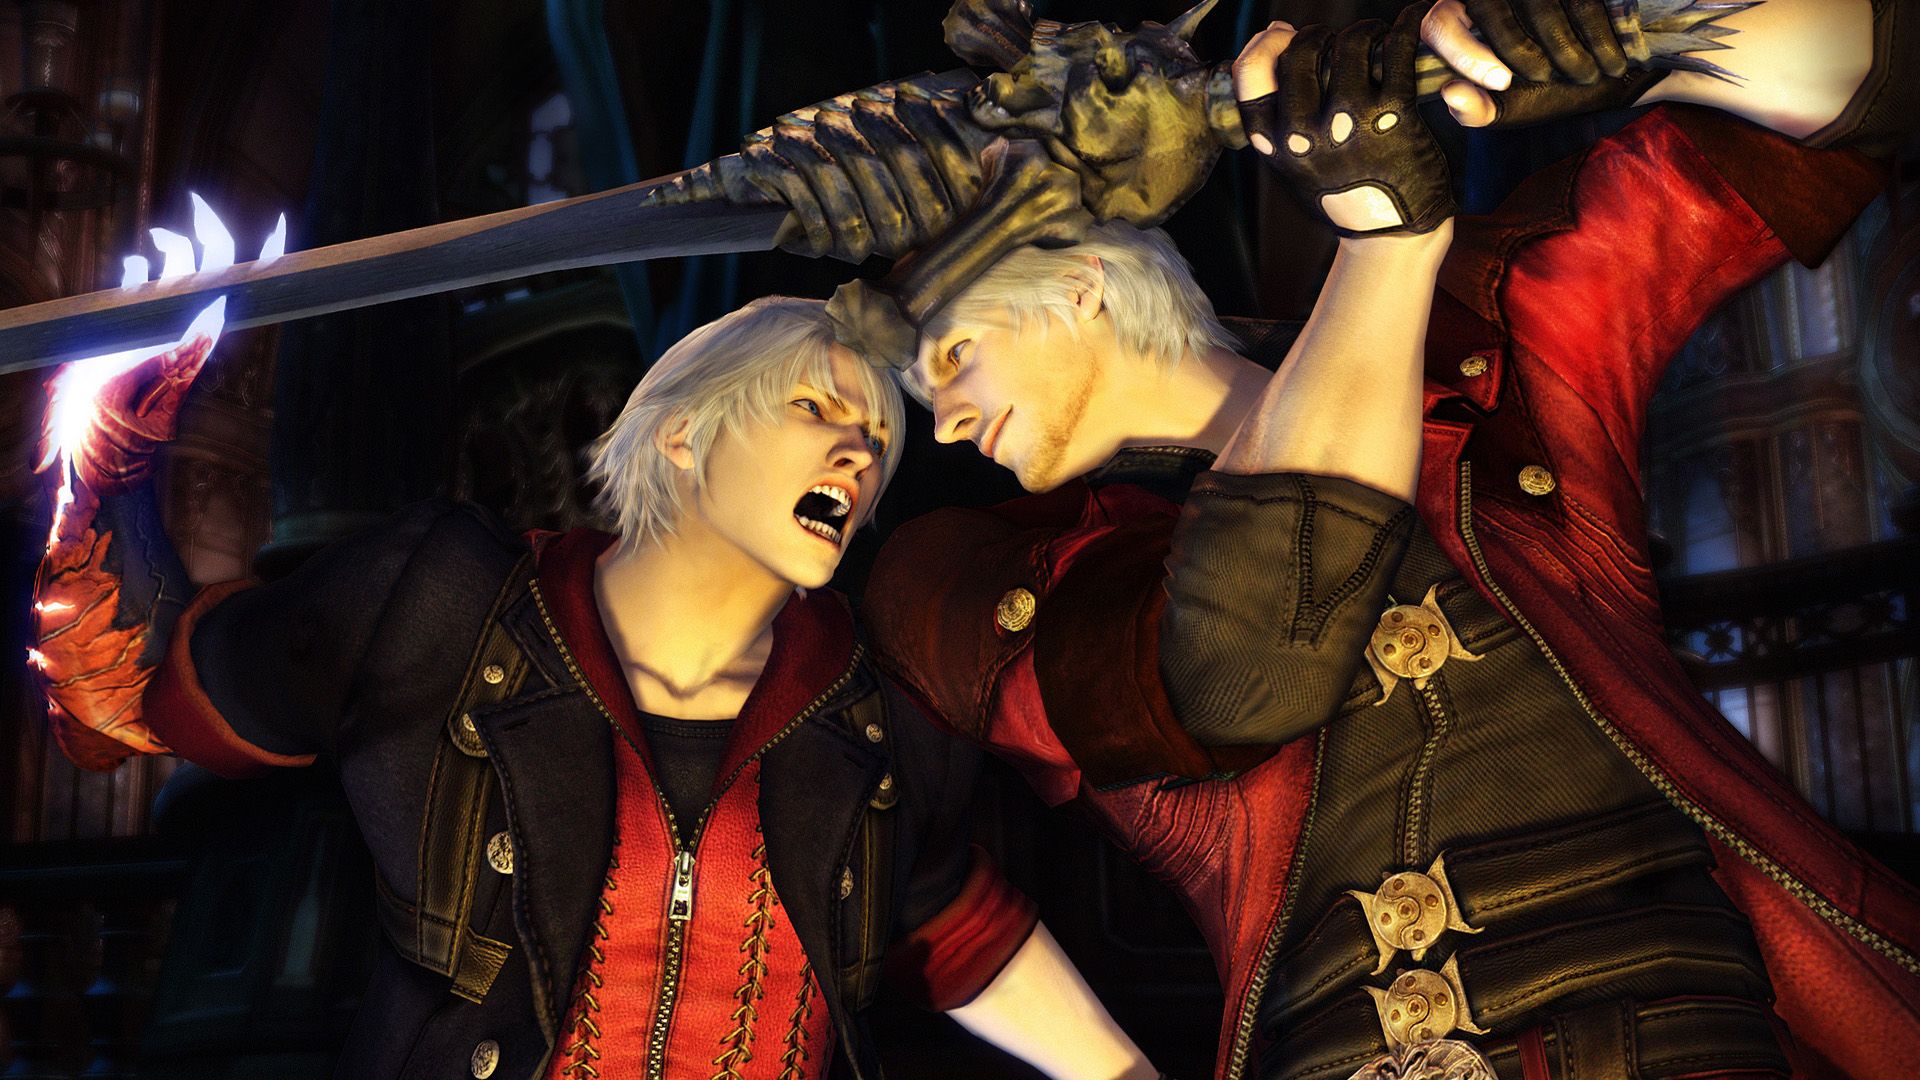 devil_may_cry_4___sibling_rivalry_1010.jpg